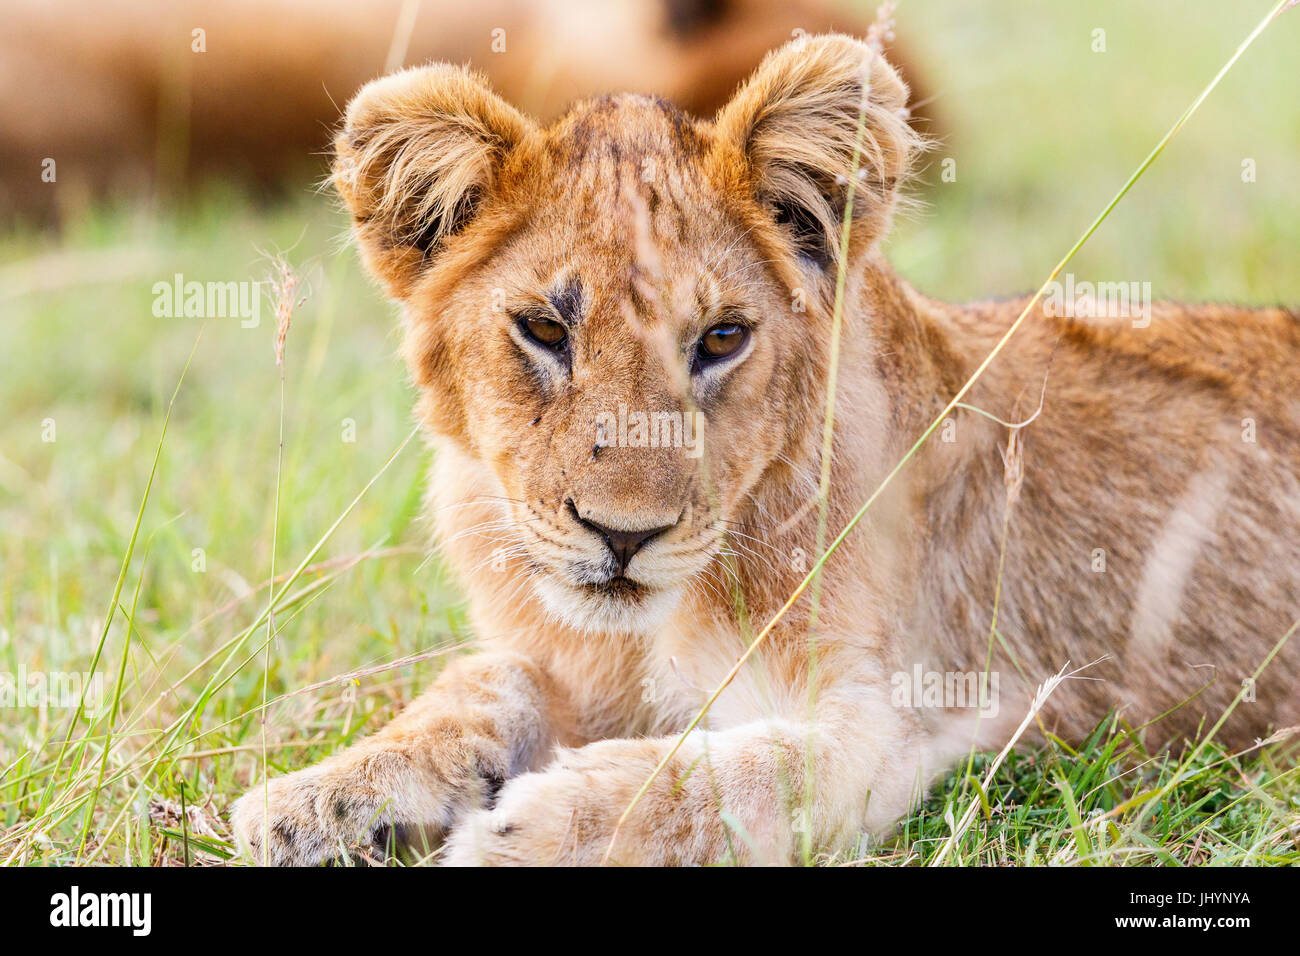 Cute lion cub lying in the grass on the African savanna Stock Photo